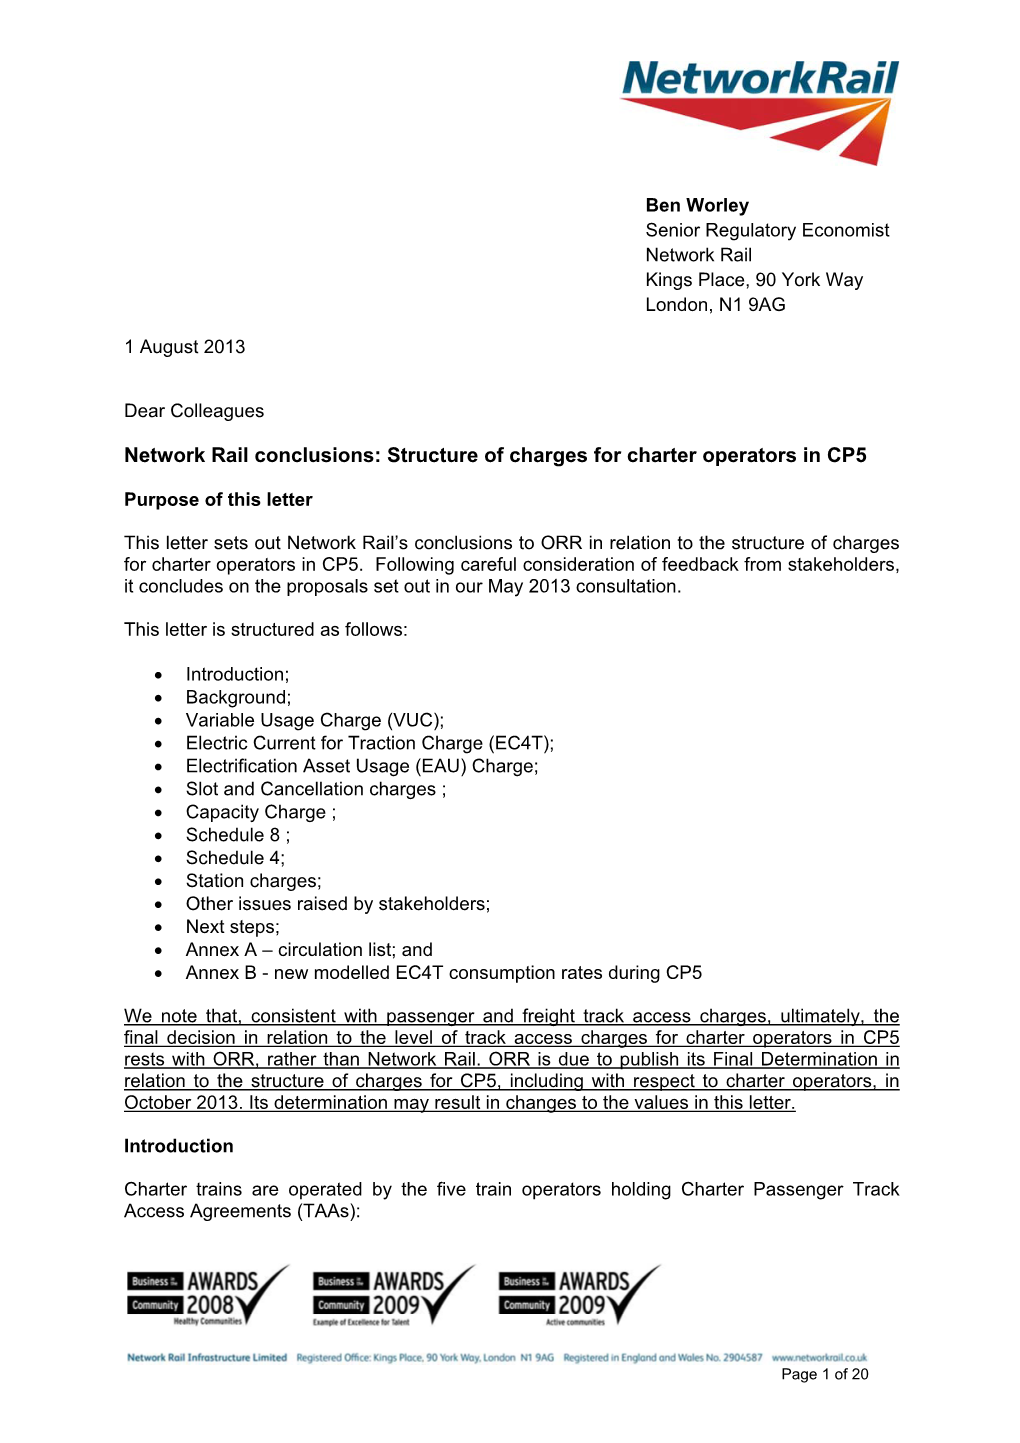 Network Rail Conclusions: Structure of Charges for Charter Operators in CP5